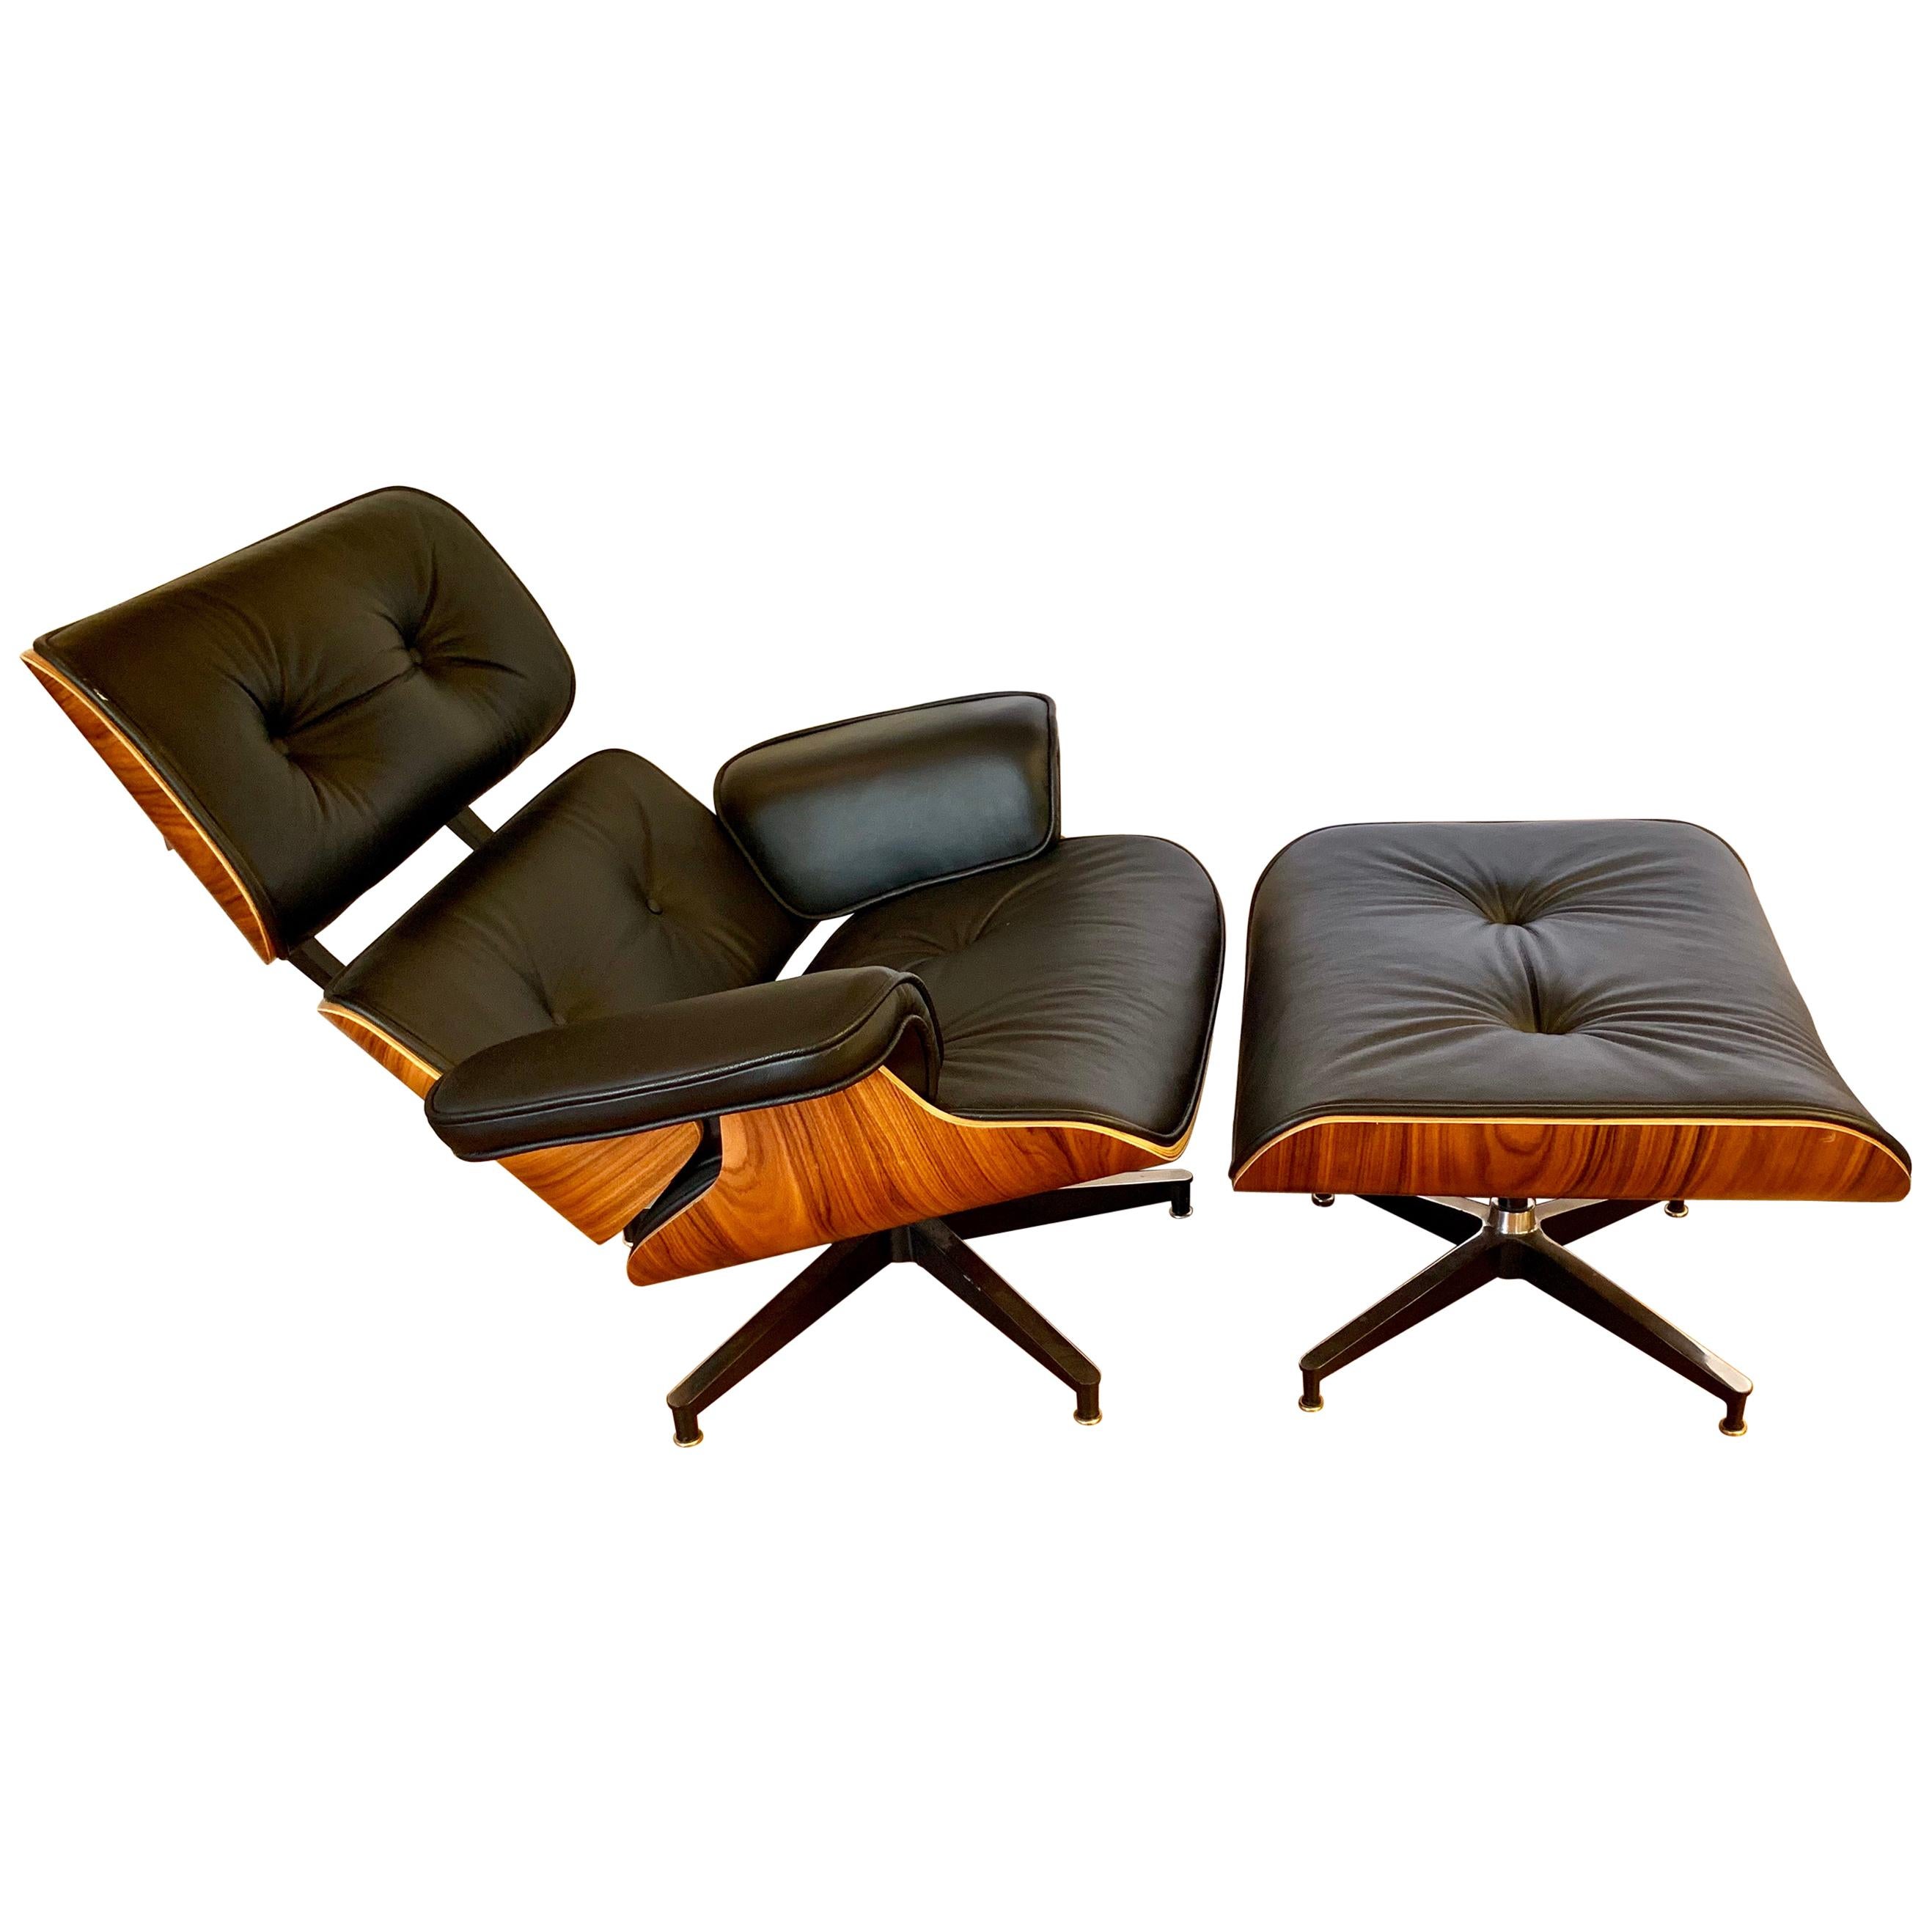 Eames Iconic Herman Miller Style Lounge Chair and Ottoman Black Leather